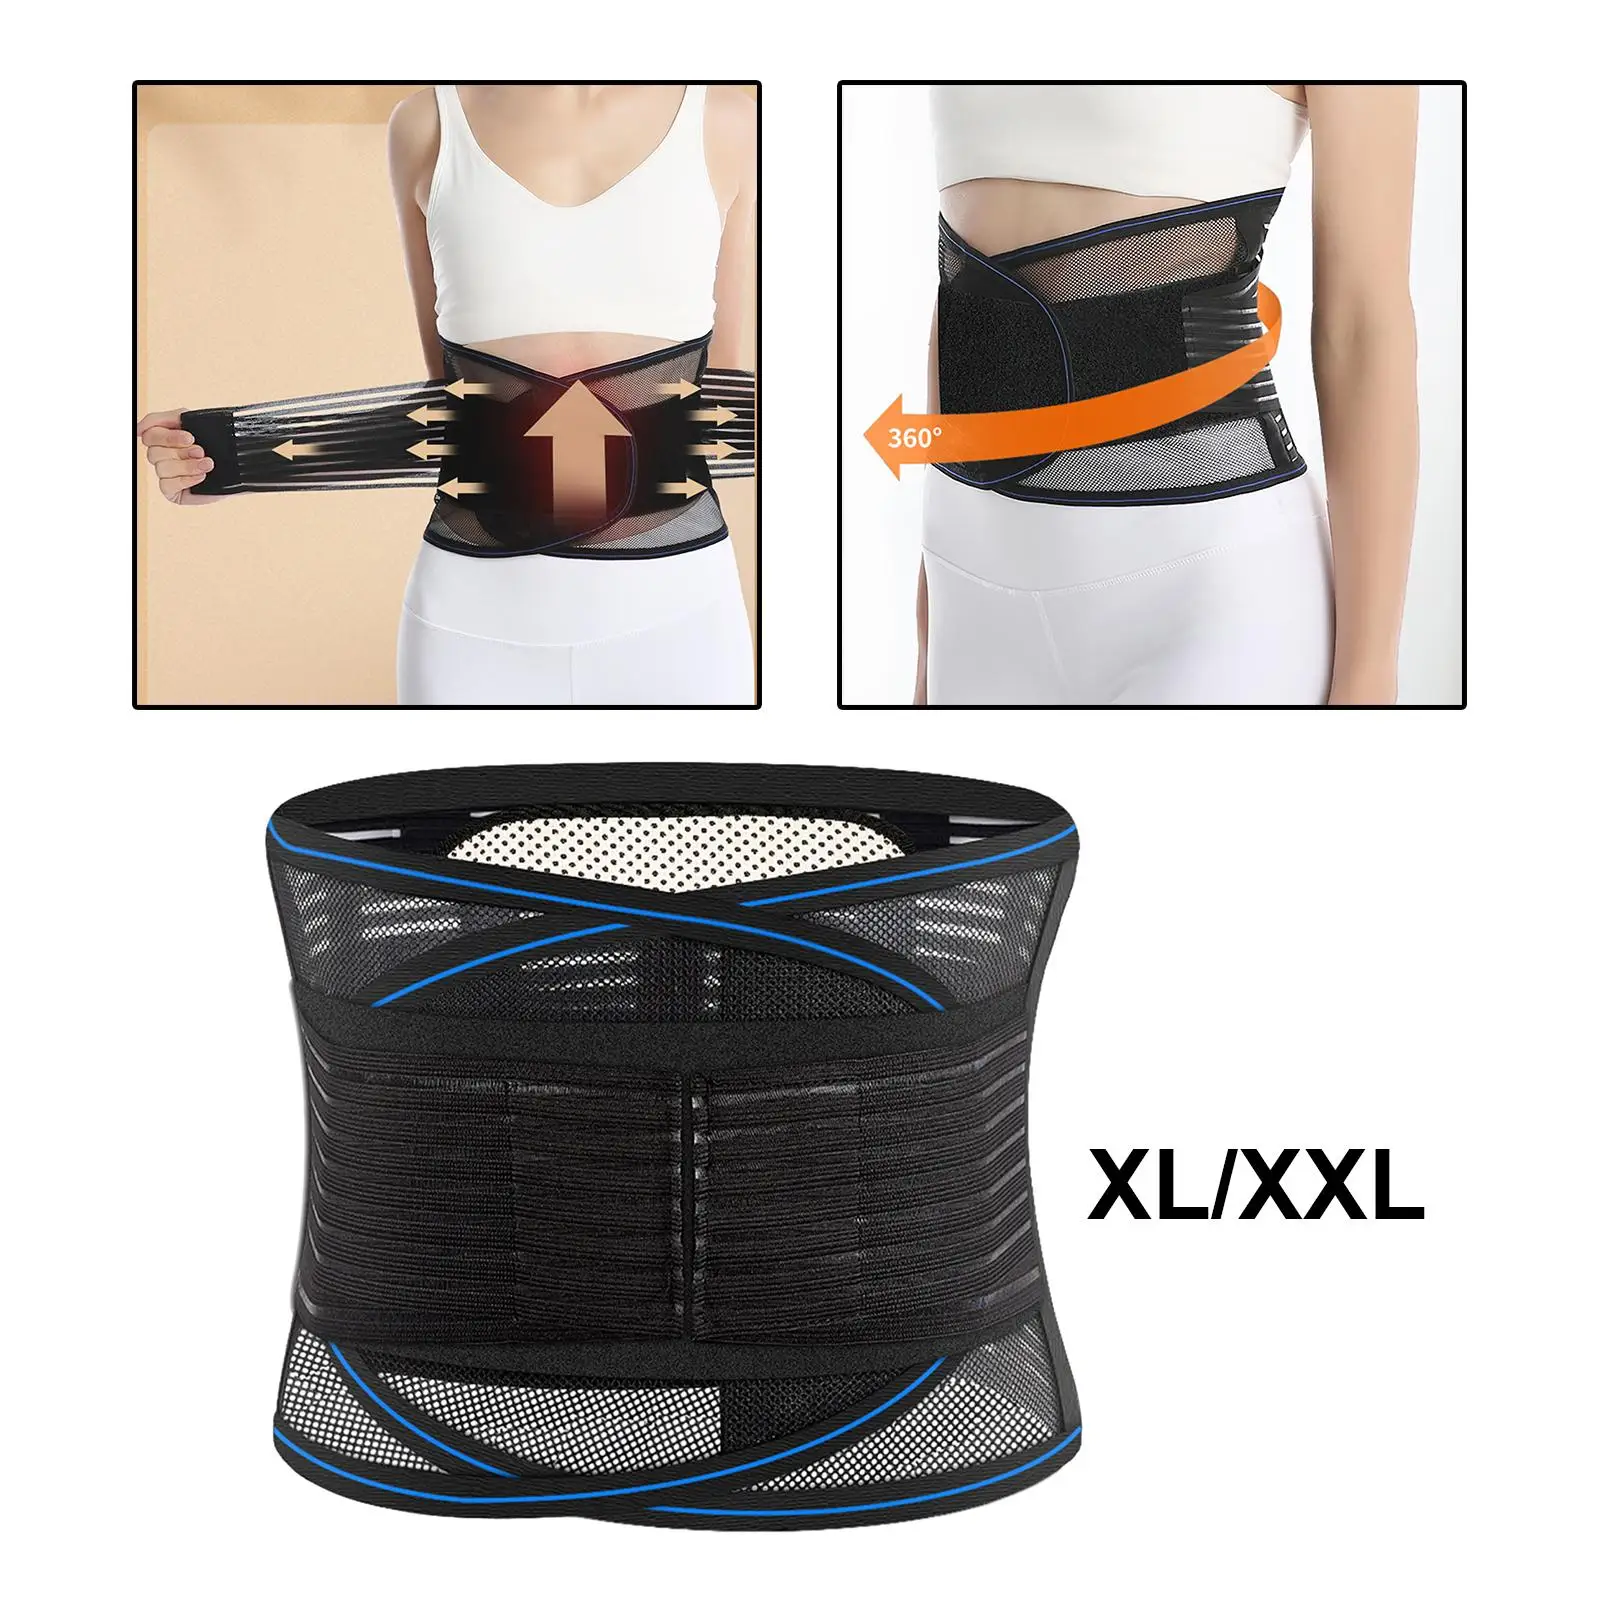 Back Brace, Lower Back Pain Ease Mesh Design with Lumbar Pad Immediate Relief from Back Pain Back Support Belt for Women Men